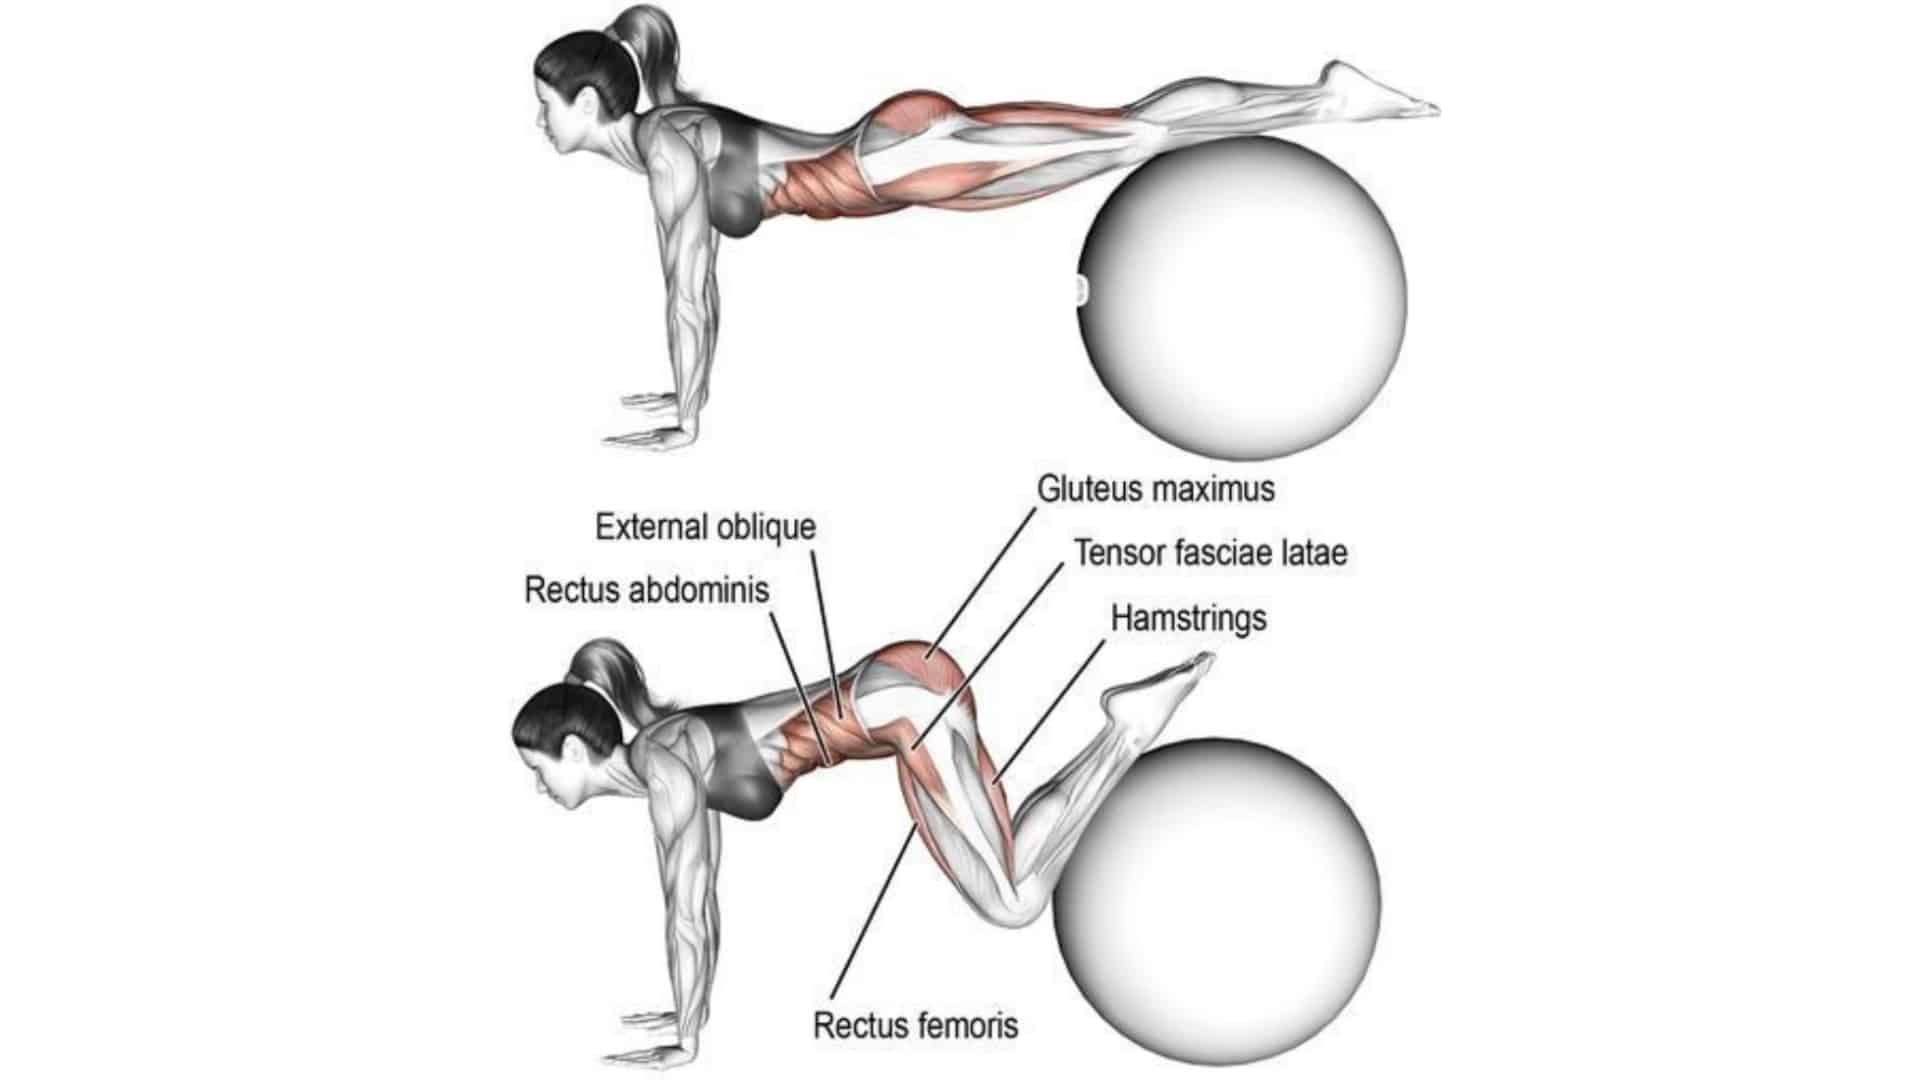 Stability Ball Tuck